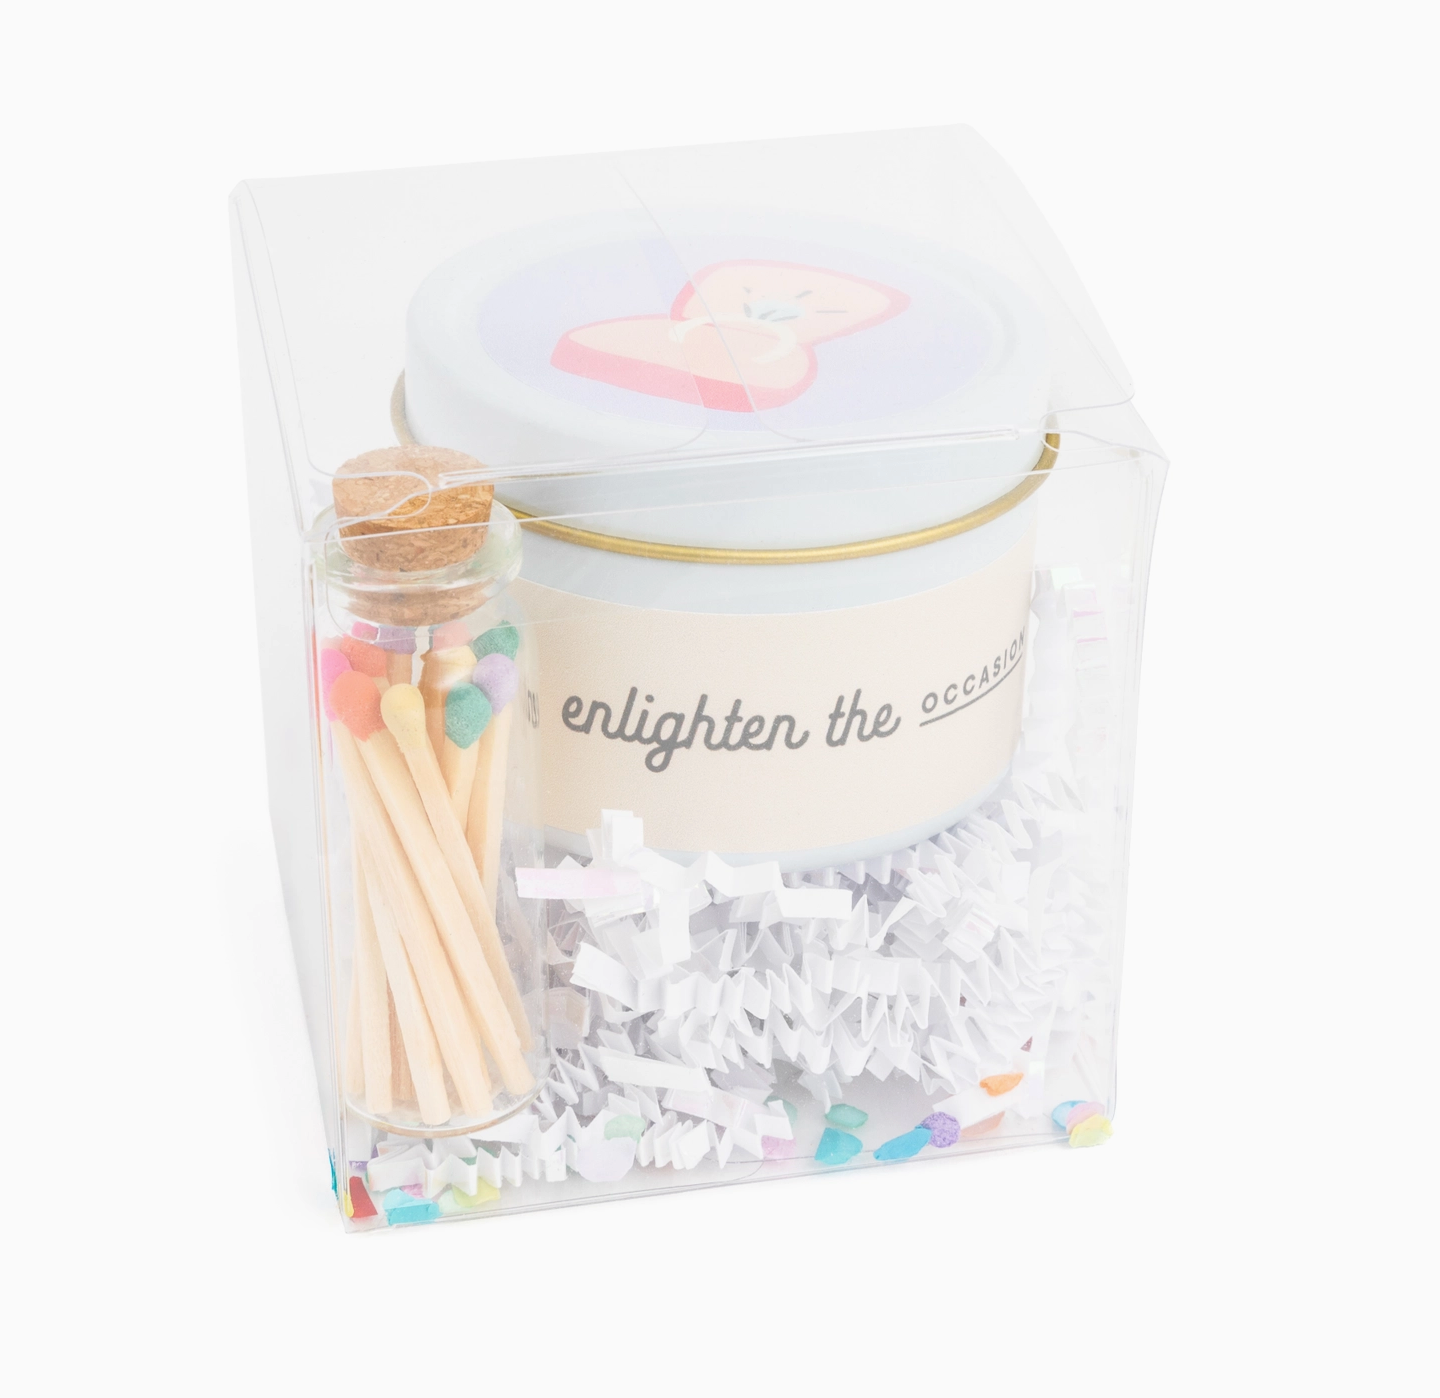 Enlightened the Occasion Wedding Cake Scented Candle and Matches Set